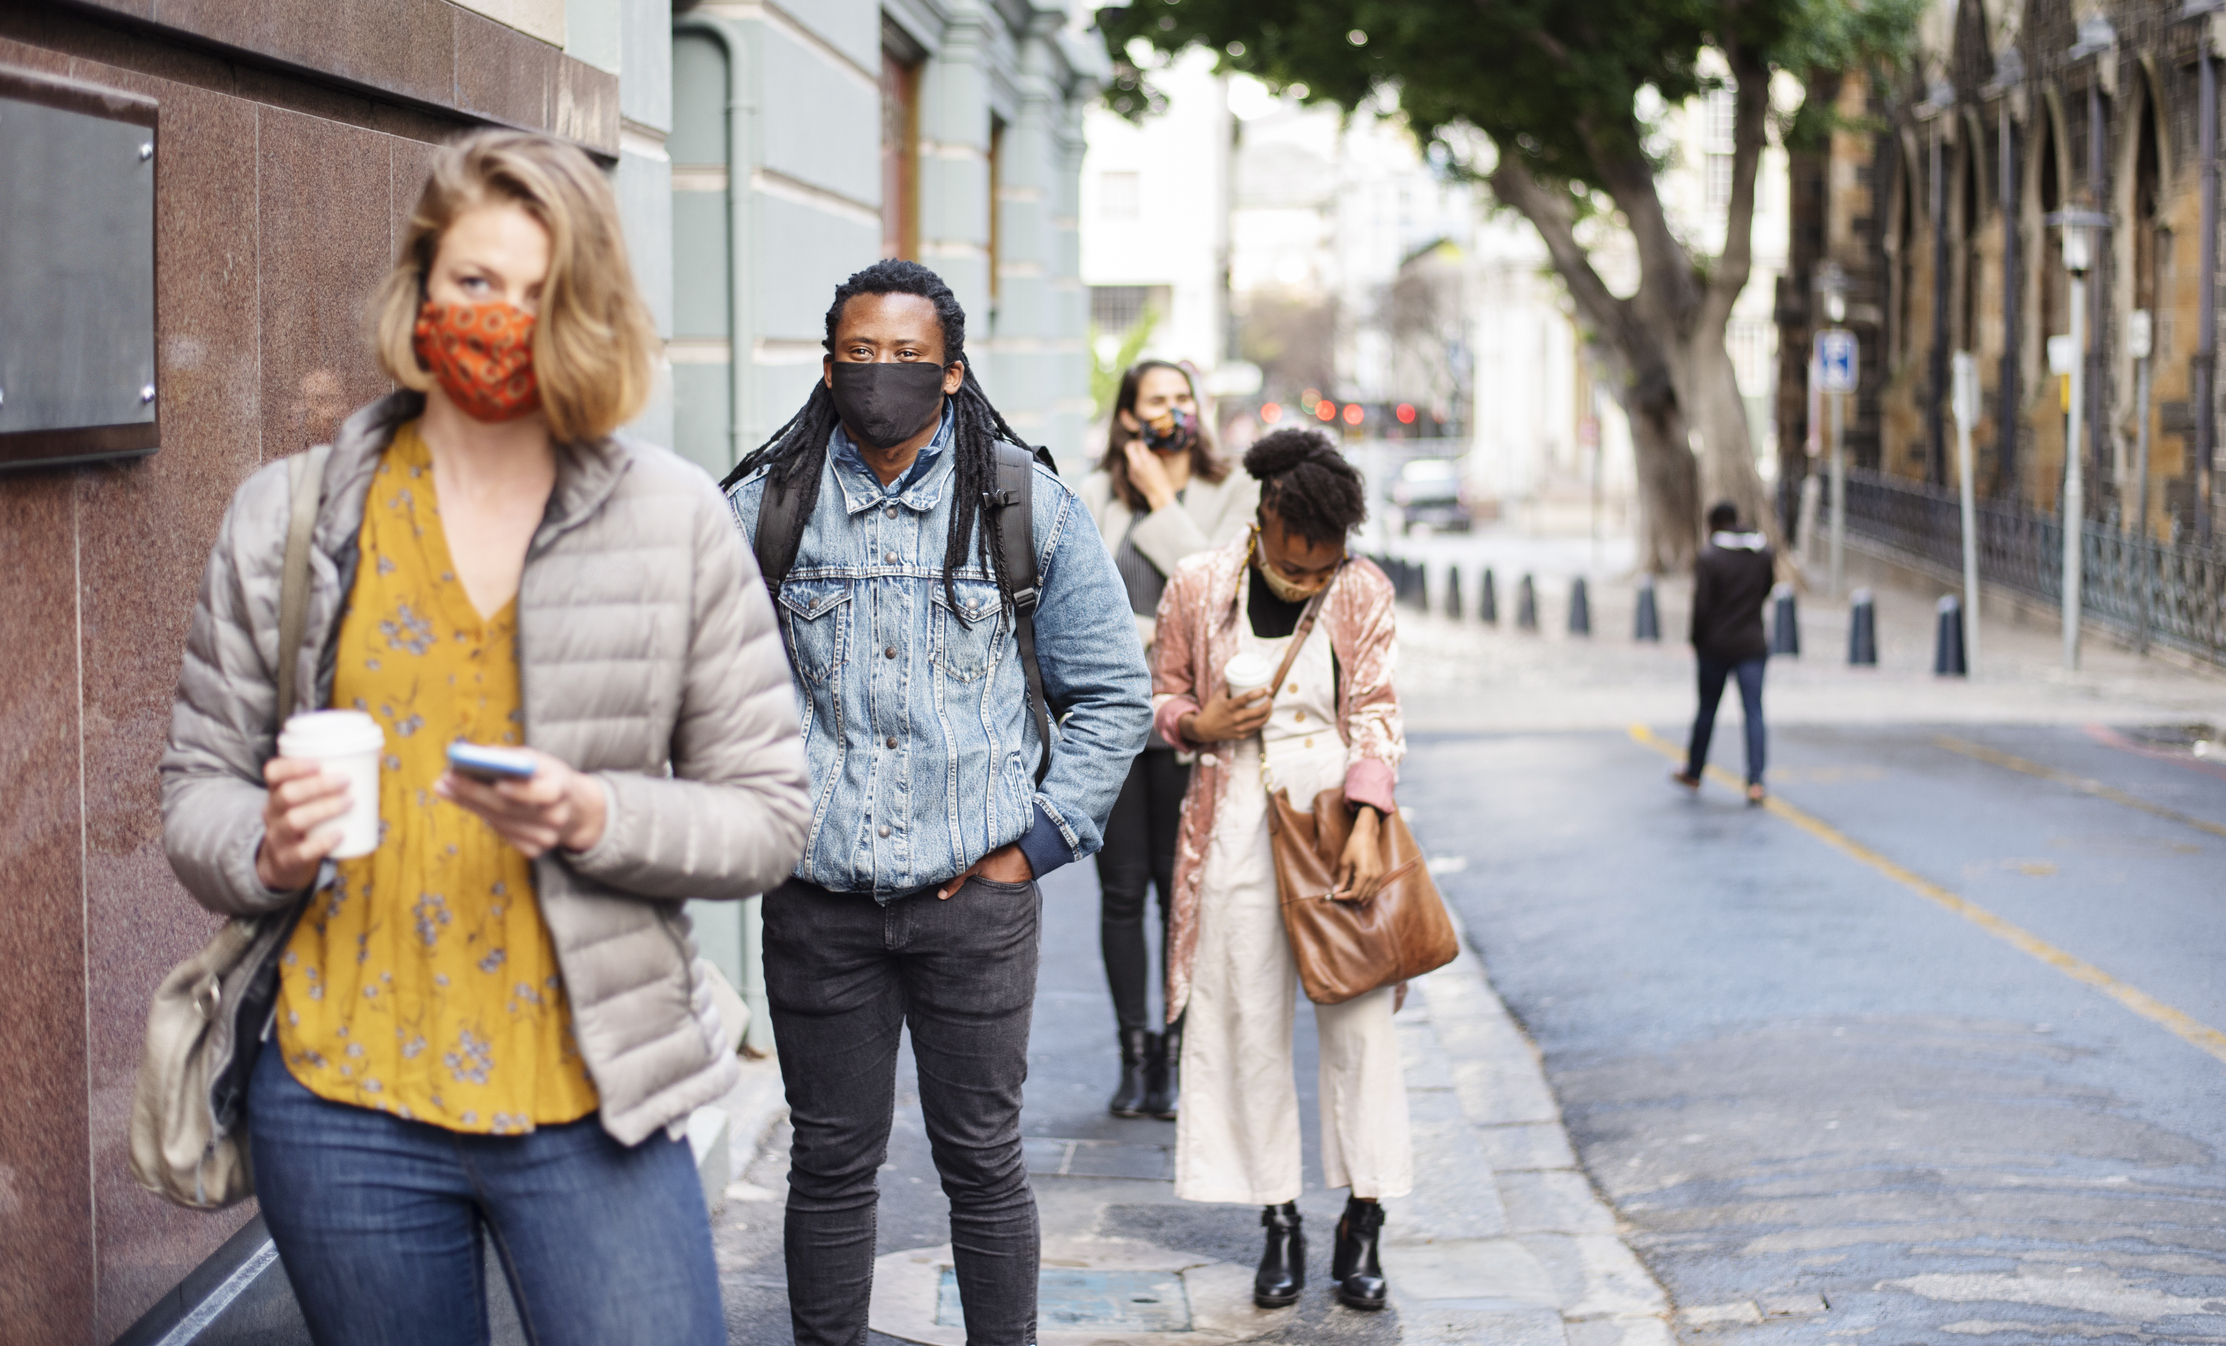 Diverse group of people wearing protective face masks practicing social distancing while waiting in a line on a city sidewalk